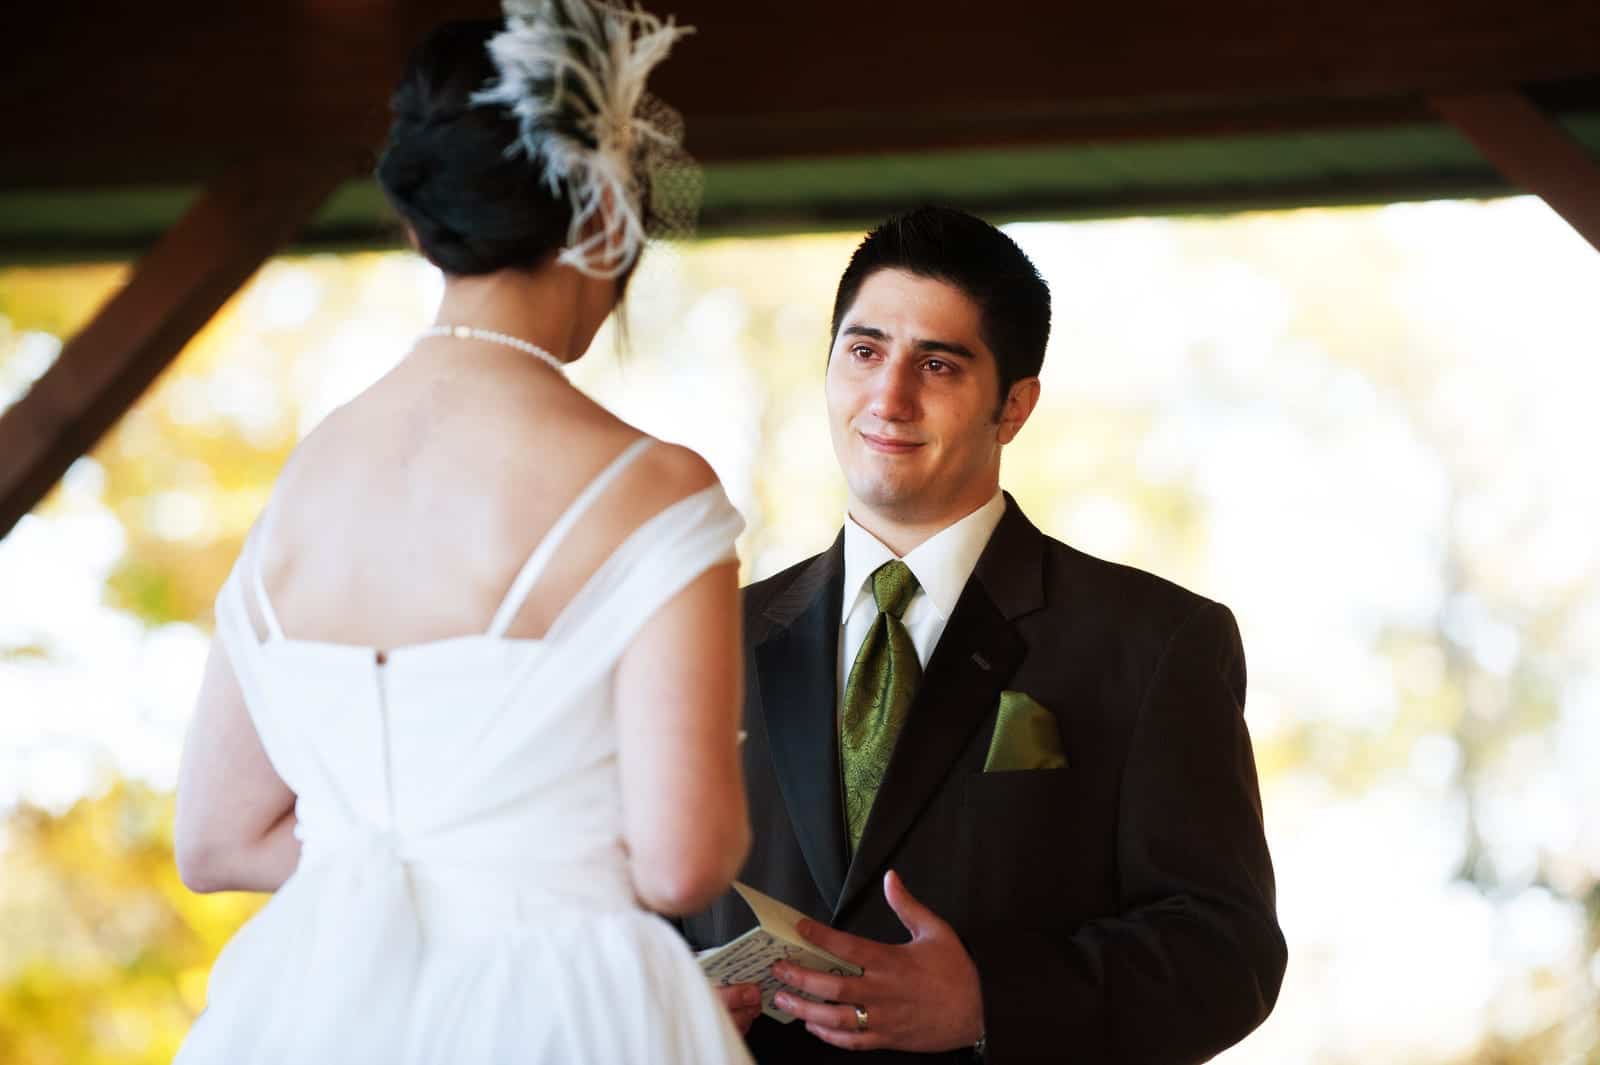 A groom cries as he exchanges vows with his bride in a pavilion during their wedding at the SNPJ.